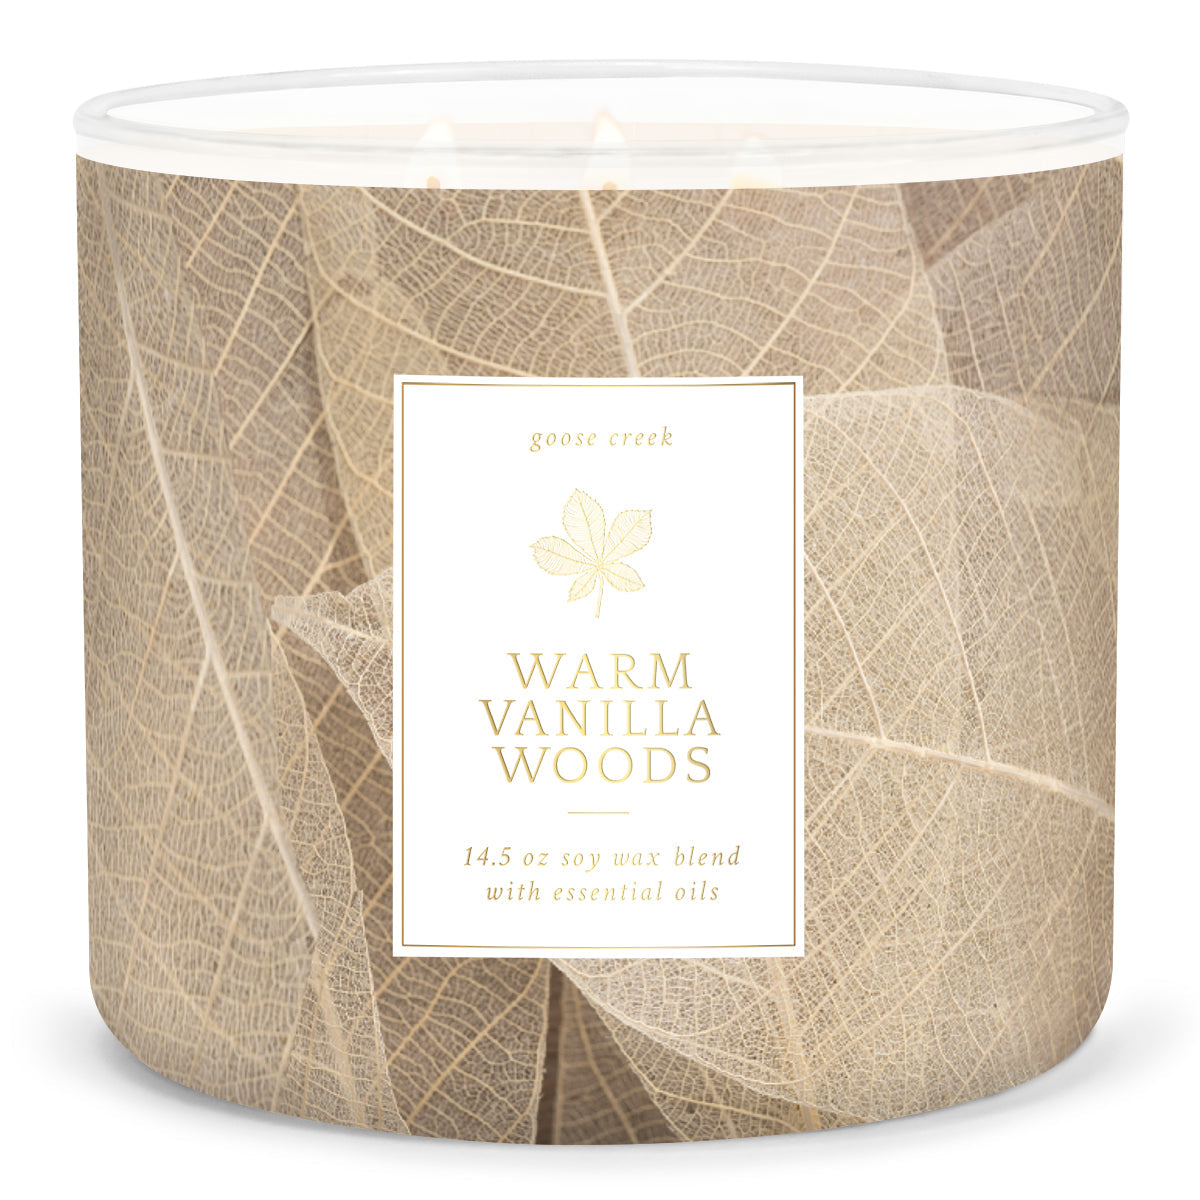 Hi everyone! I forgot how much I love Soft Blanket. My husband wants to buy  more Yankee lrg jars. I need recs. More info in comments :  r/goosecreekcandles